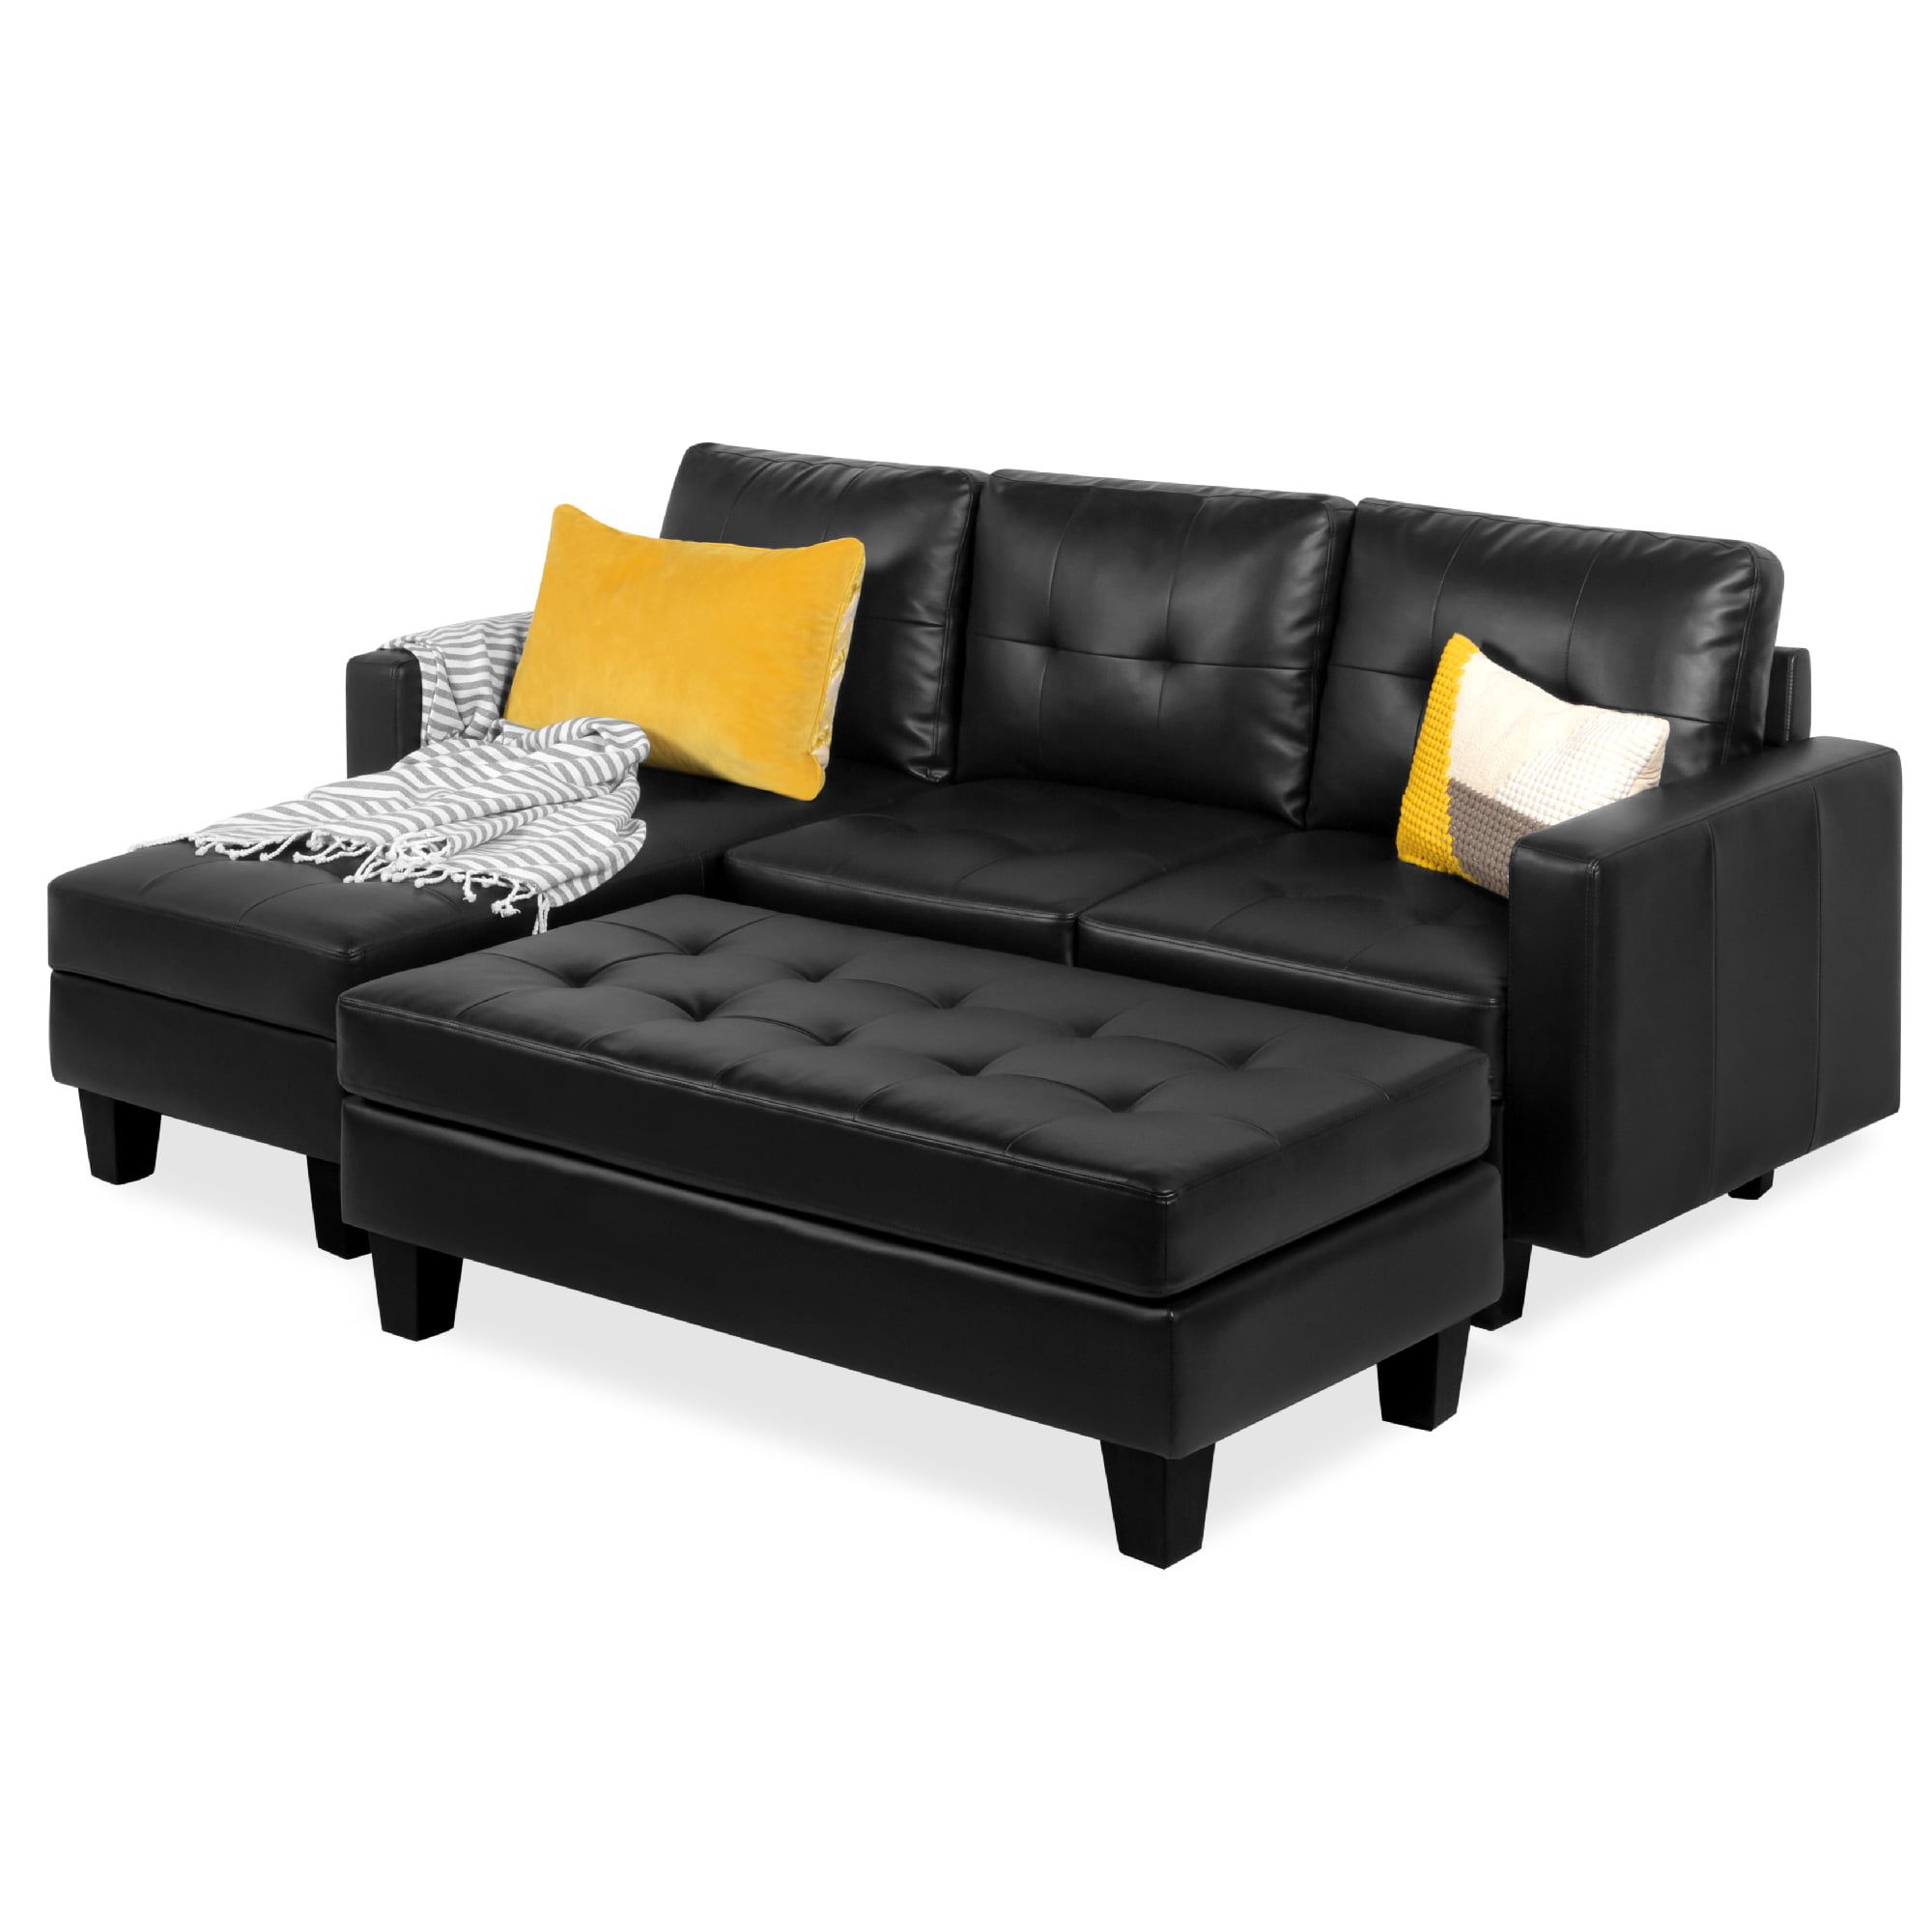 Best Choice Products 3 Seat L Shape Tufted Faux Leather Sectional Sofa With 3 Seat L Shaped Sofas In Black (View 4 of 20)